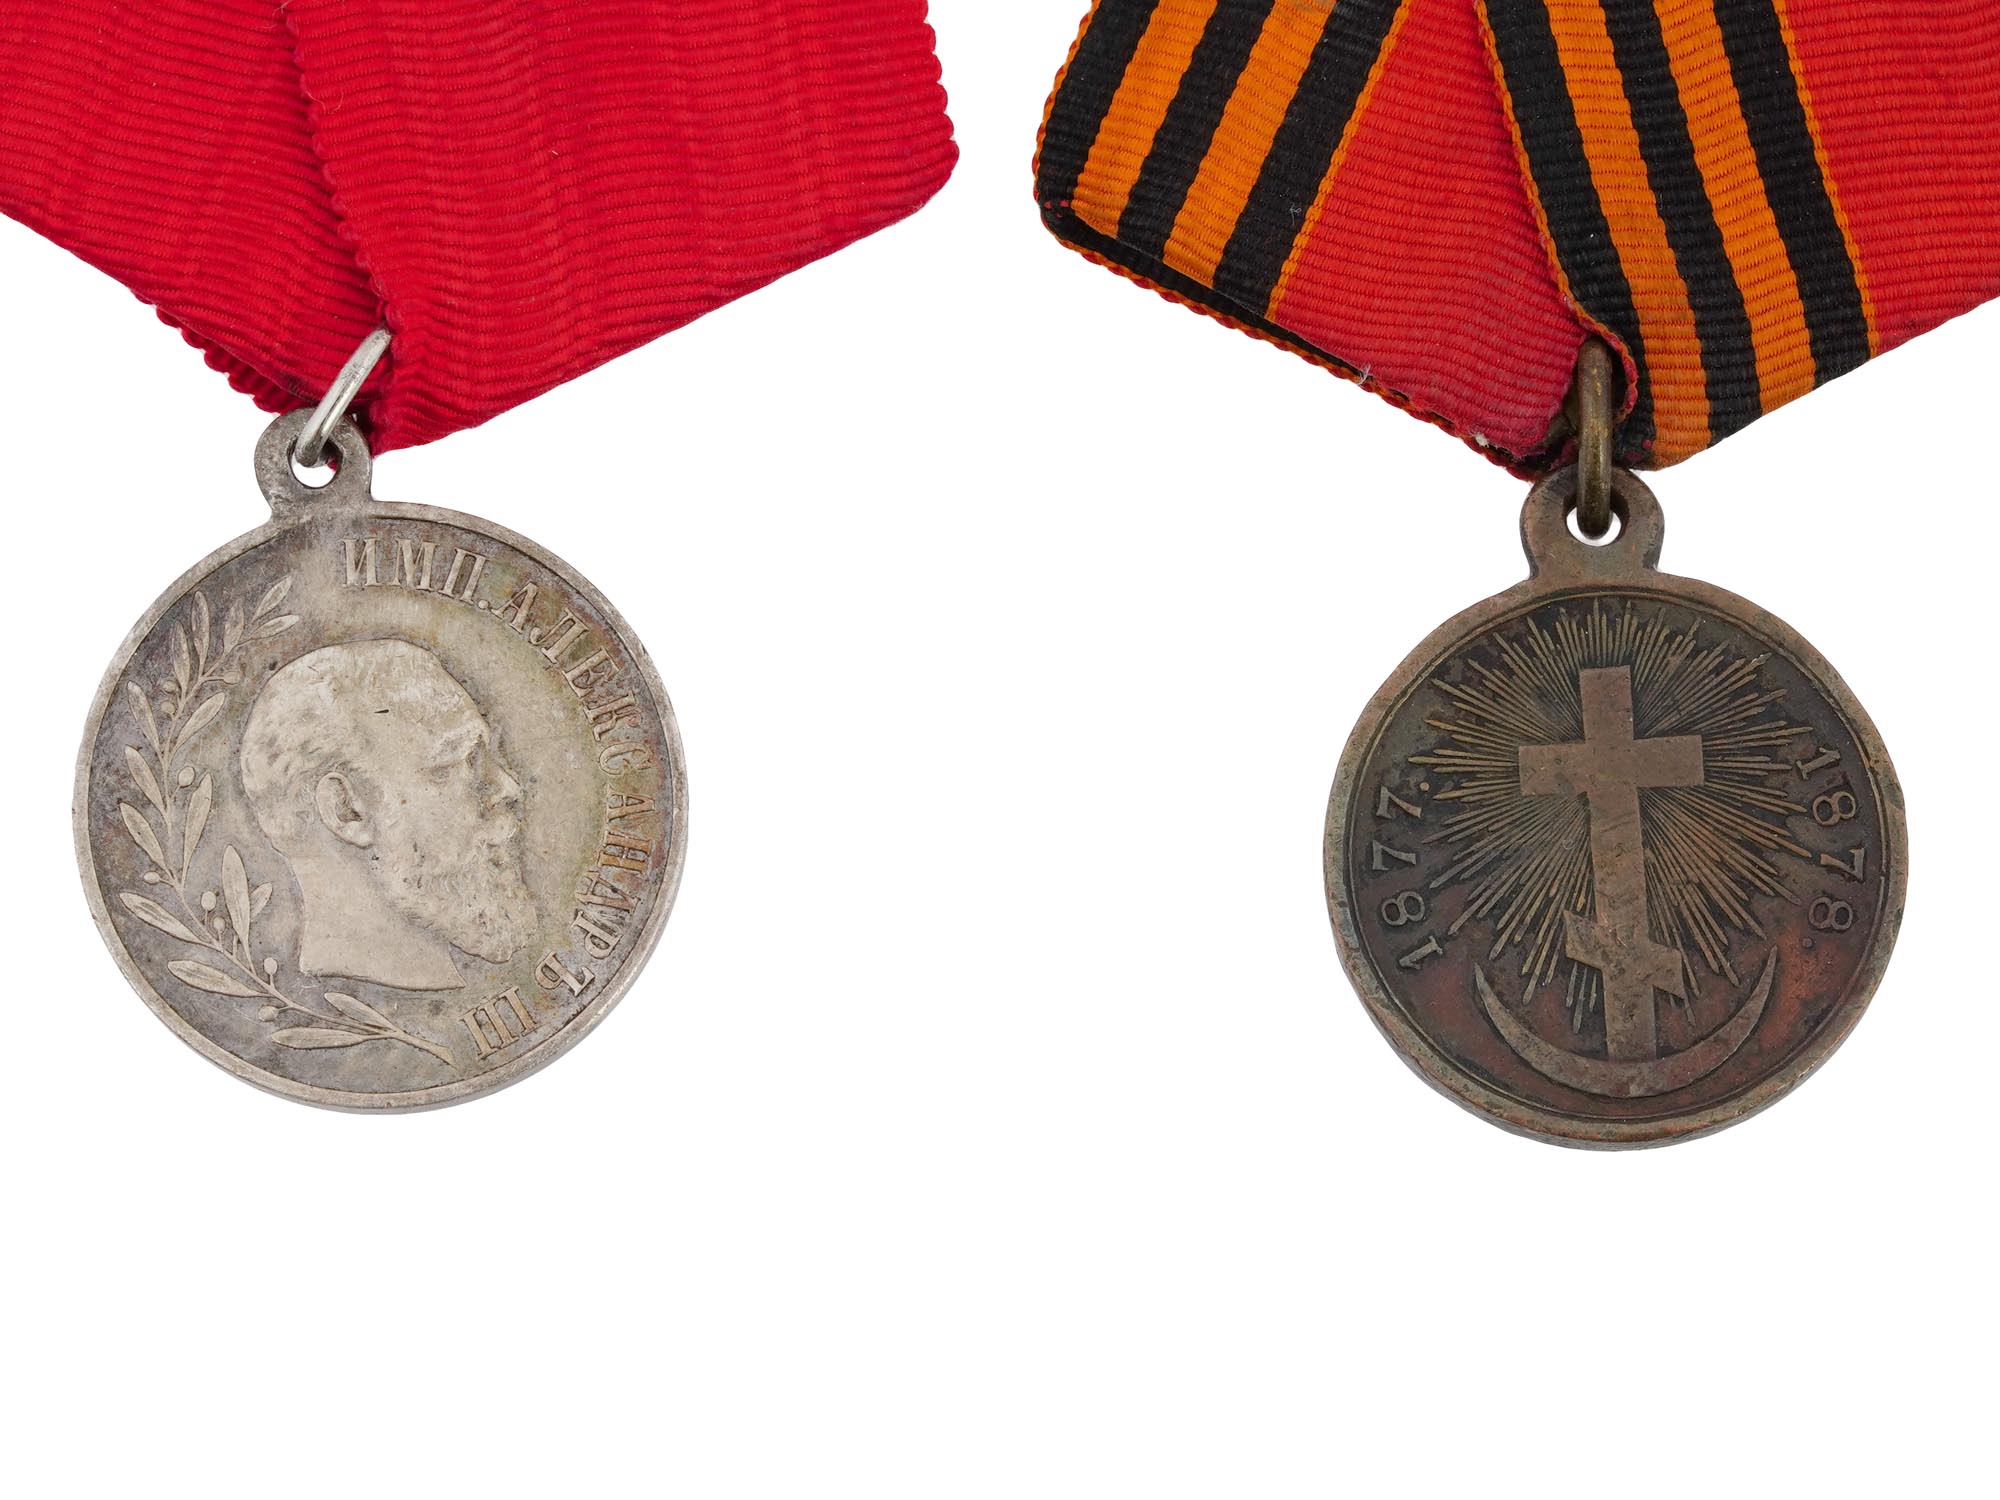 ANTIQUE RUSSIAN EMPIRE HISTORICAL AND MILITARY MEDALS PIC-2